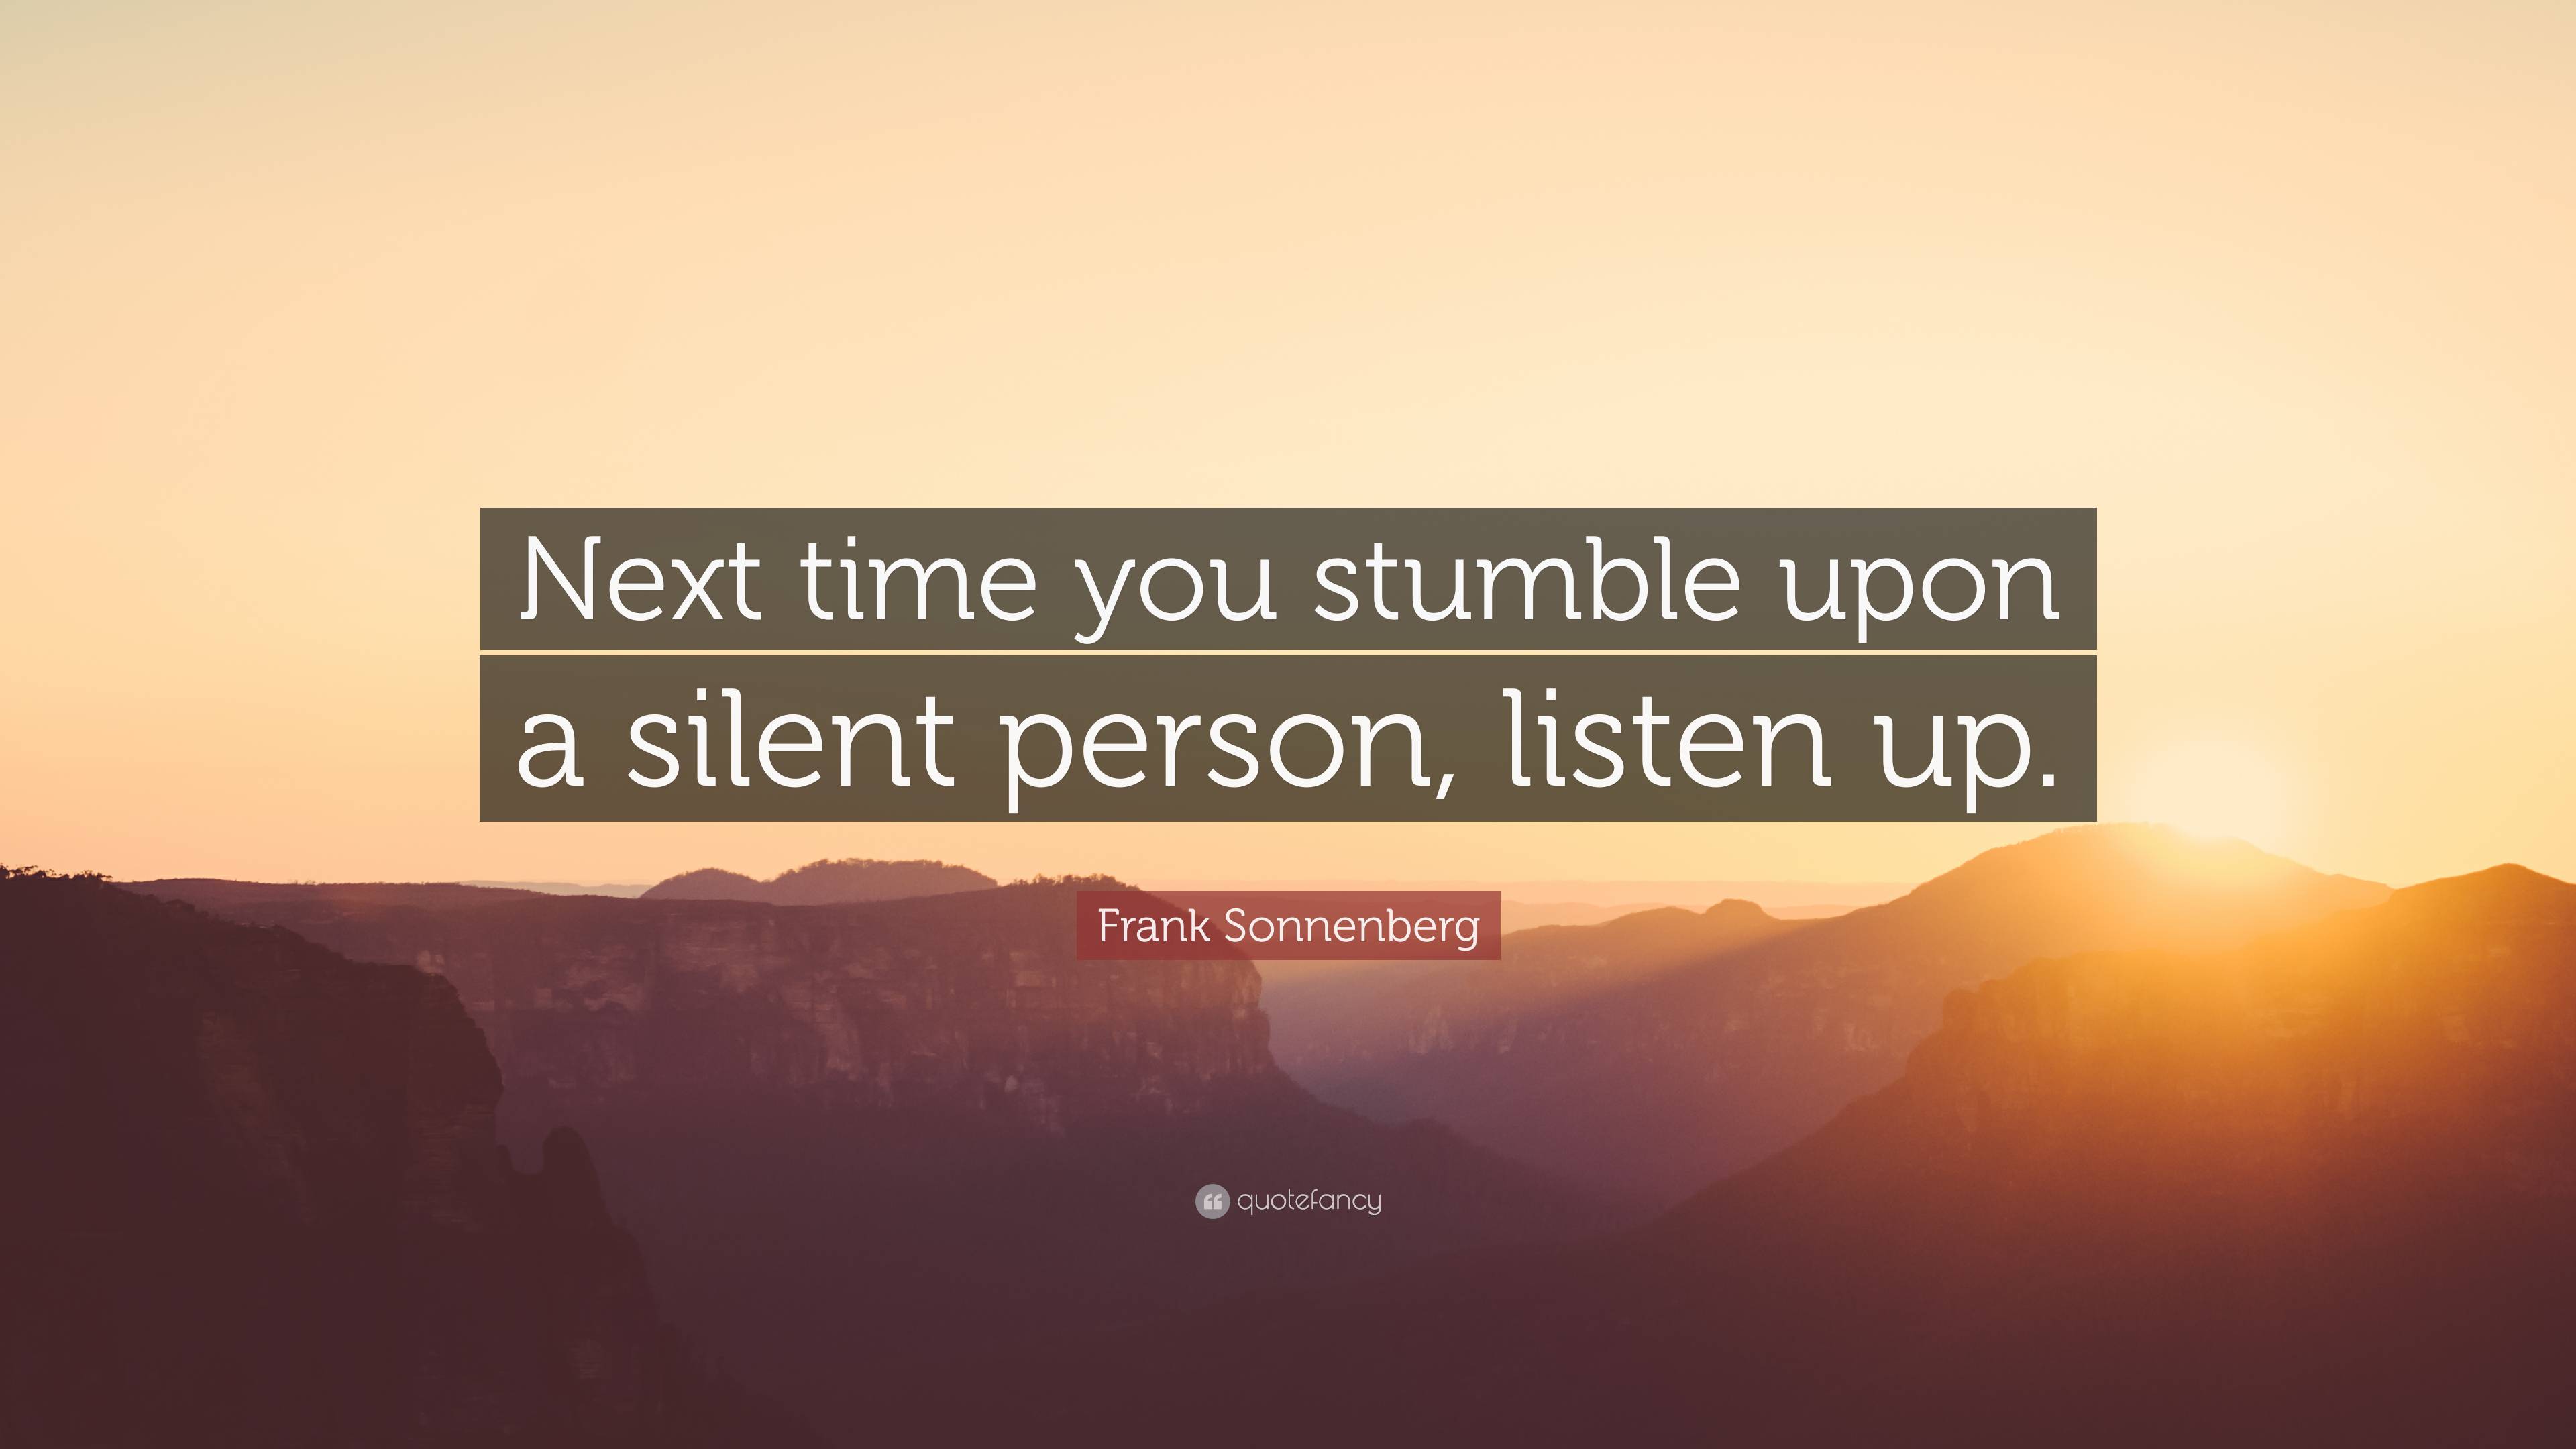 Frank Sonnenberg Quote: “Next time you stumble upon a silent person ...